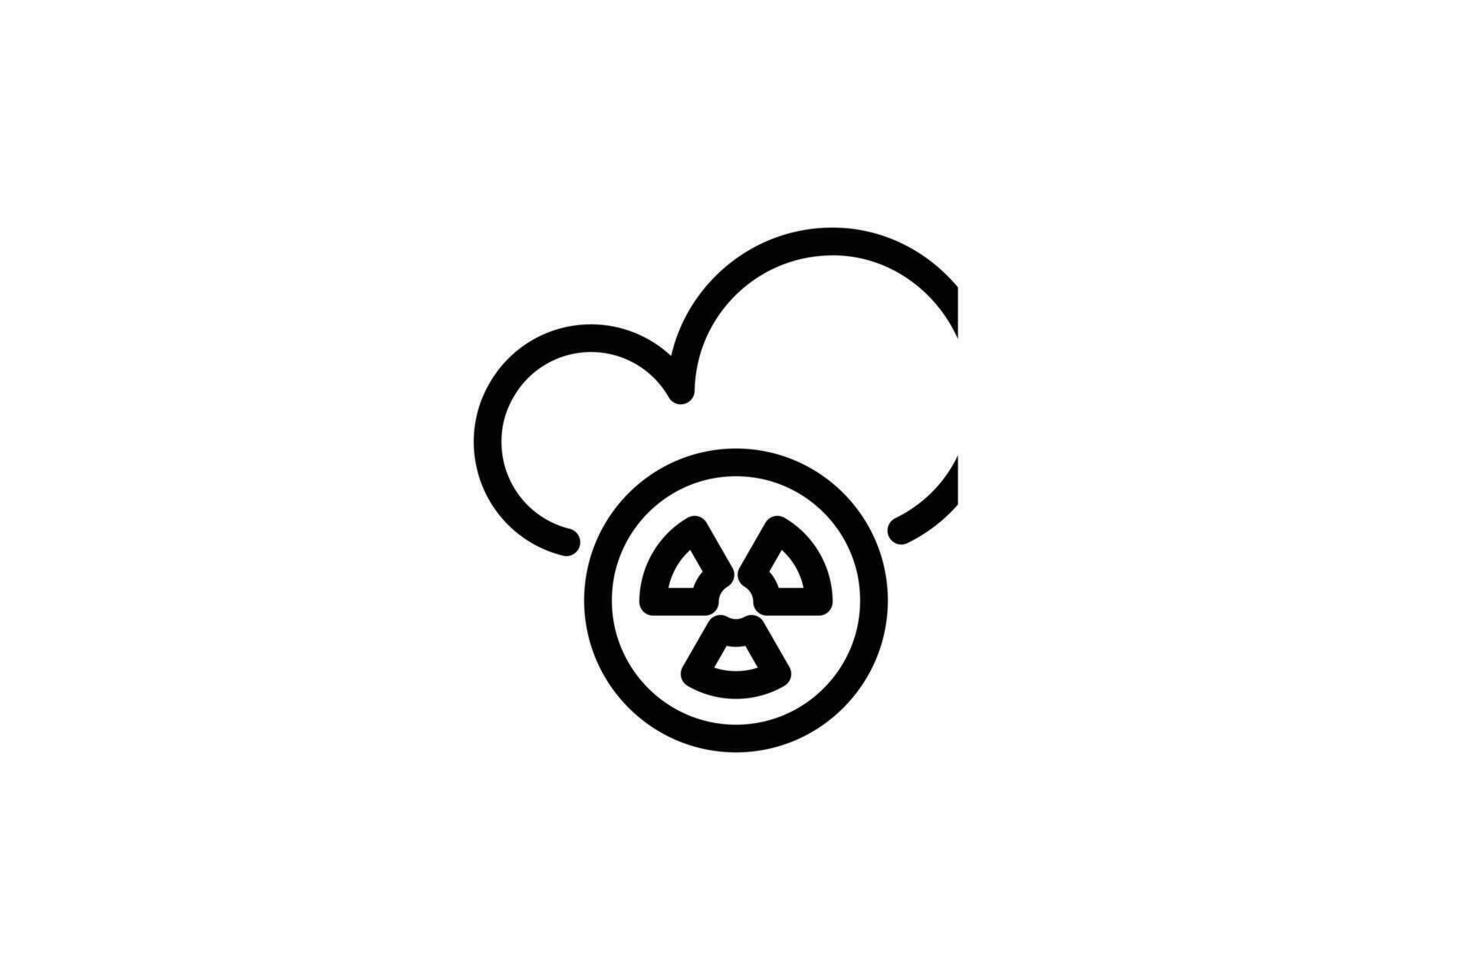 Nuclear cloud icon pollution line style free vector